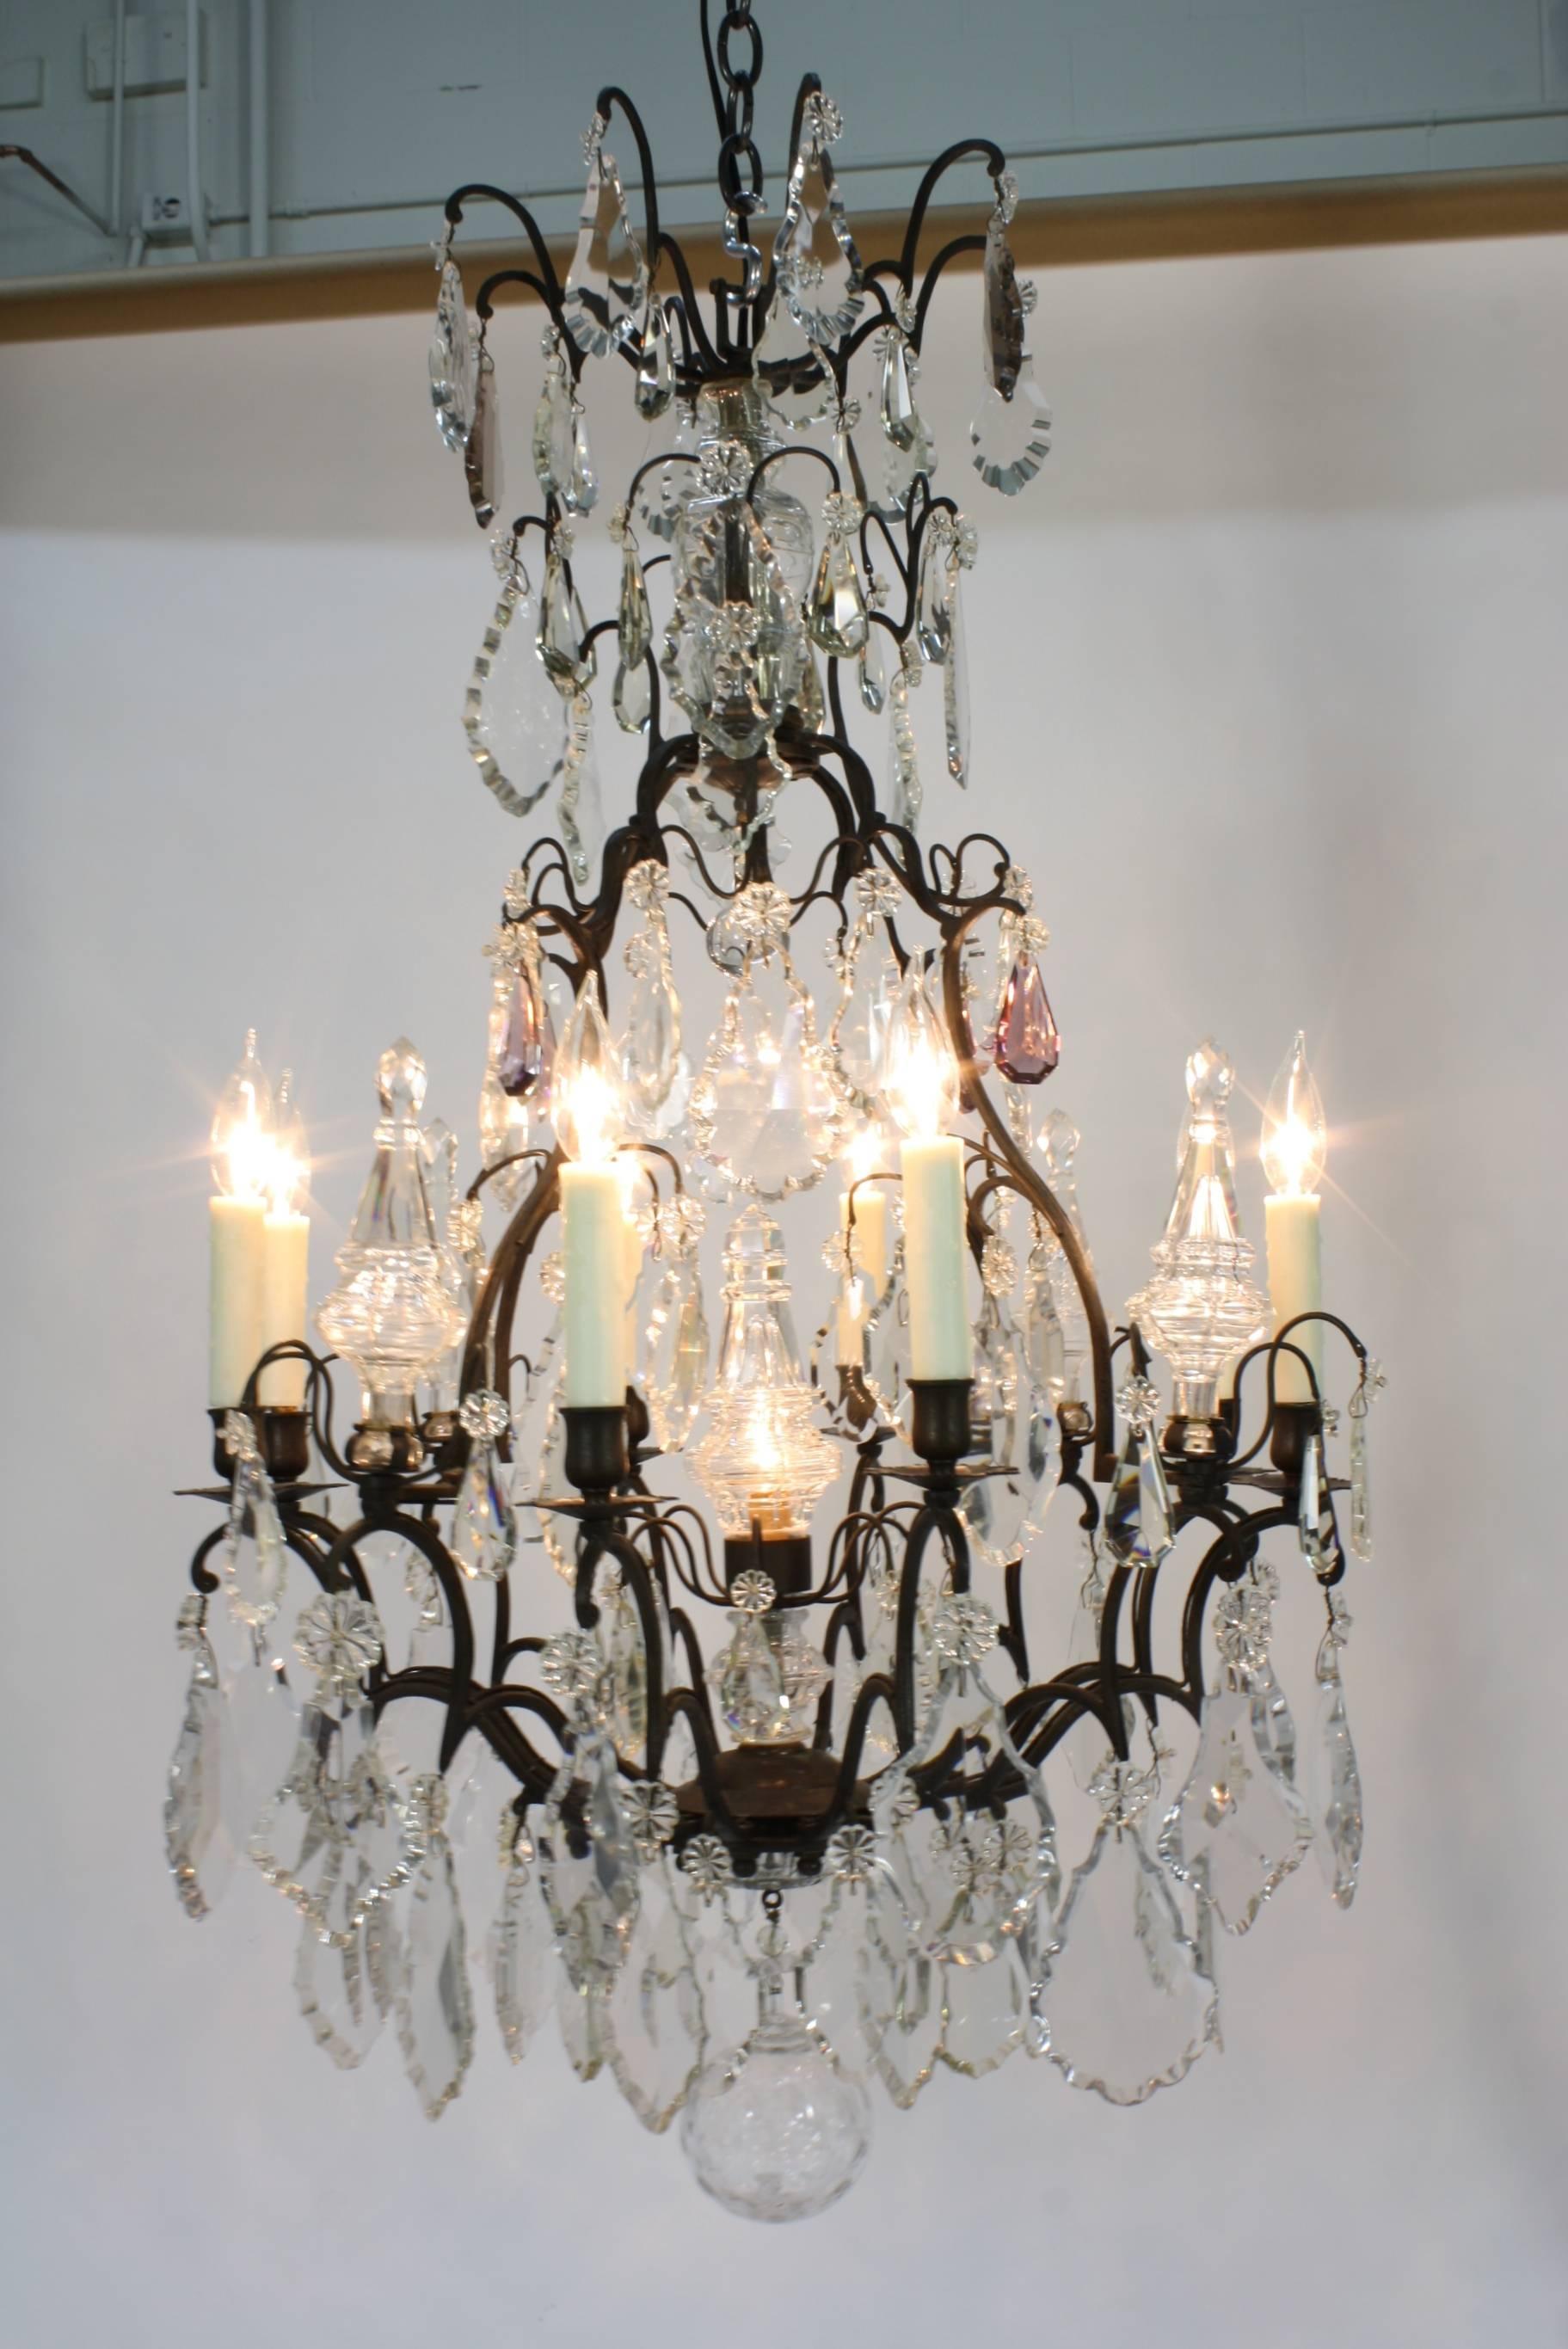 An impressive French patinated bronze cage-form chandelier, with a nice array of crystals (including some pale lavender crystals) and a large crystal ball. The chandelier has been recently re-electrified, with new dripped-wax candle covers, and has